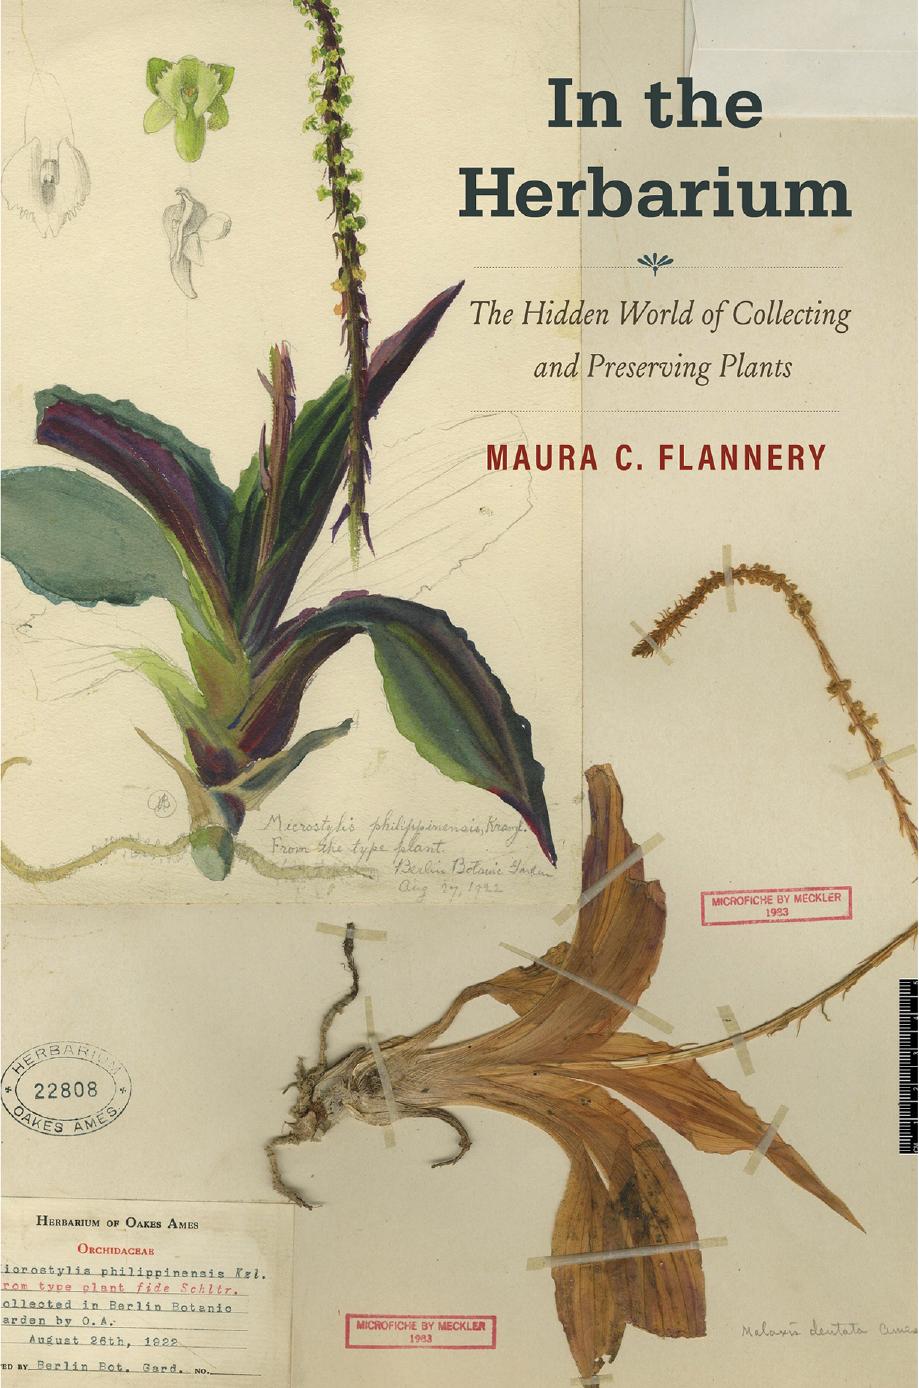 In the Herbarium: The Hidden World of Collecting and Preserving Plants by Maura C. Flannery